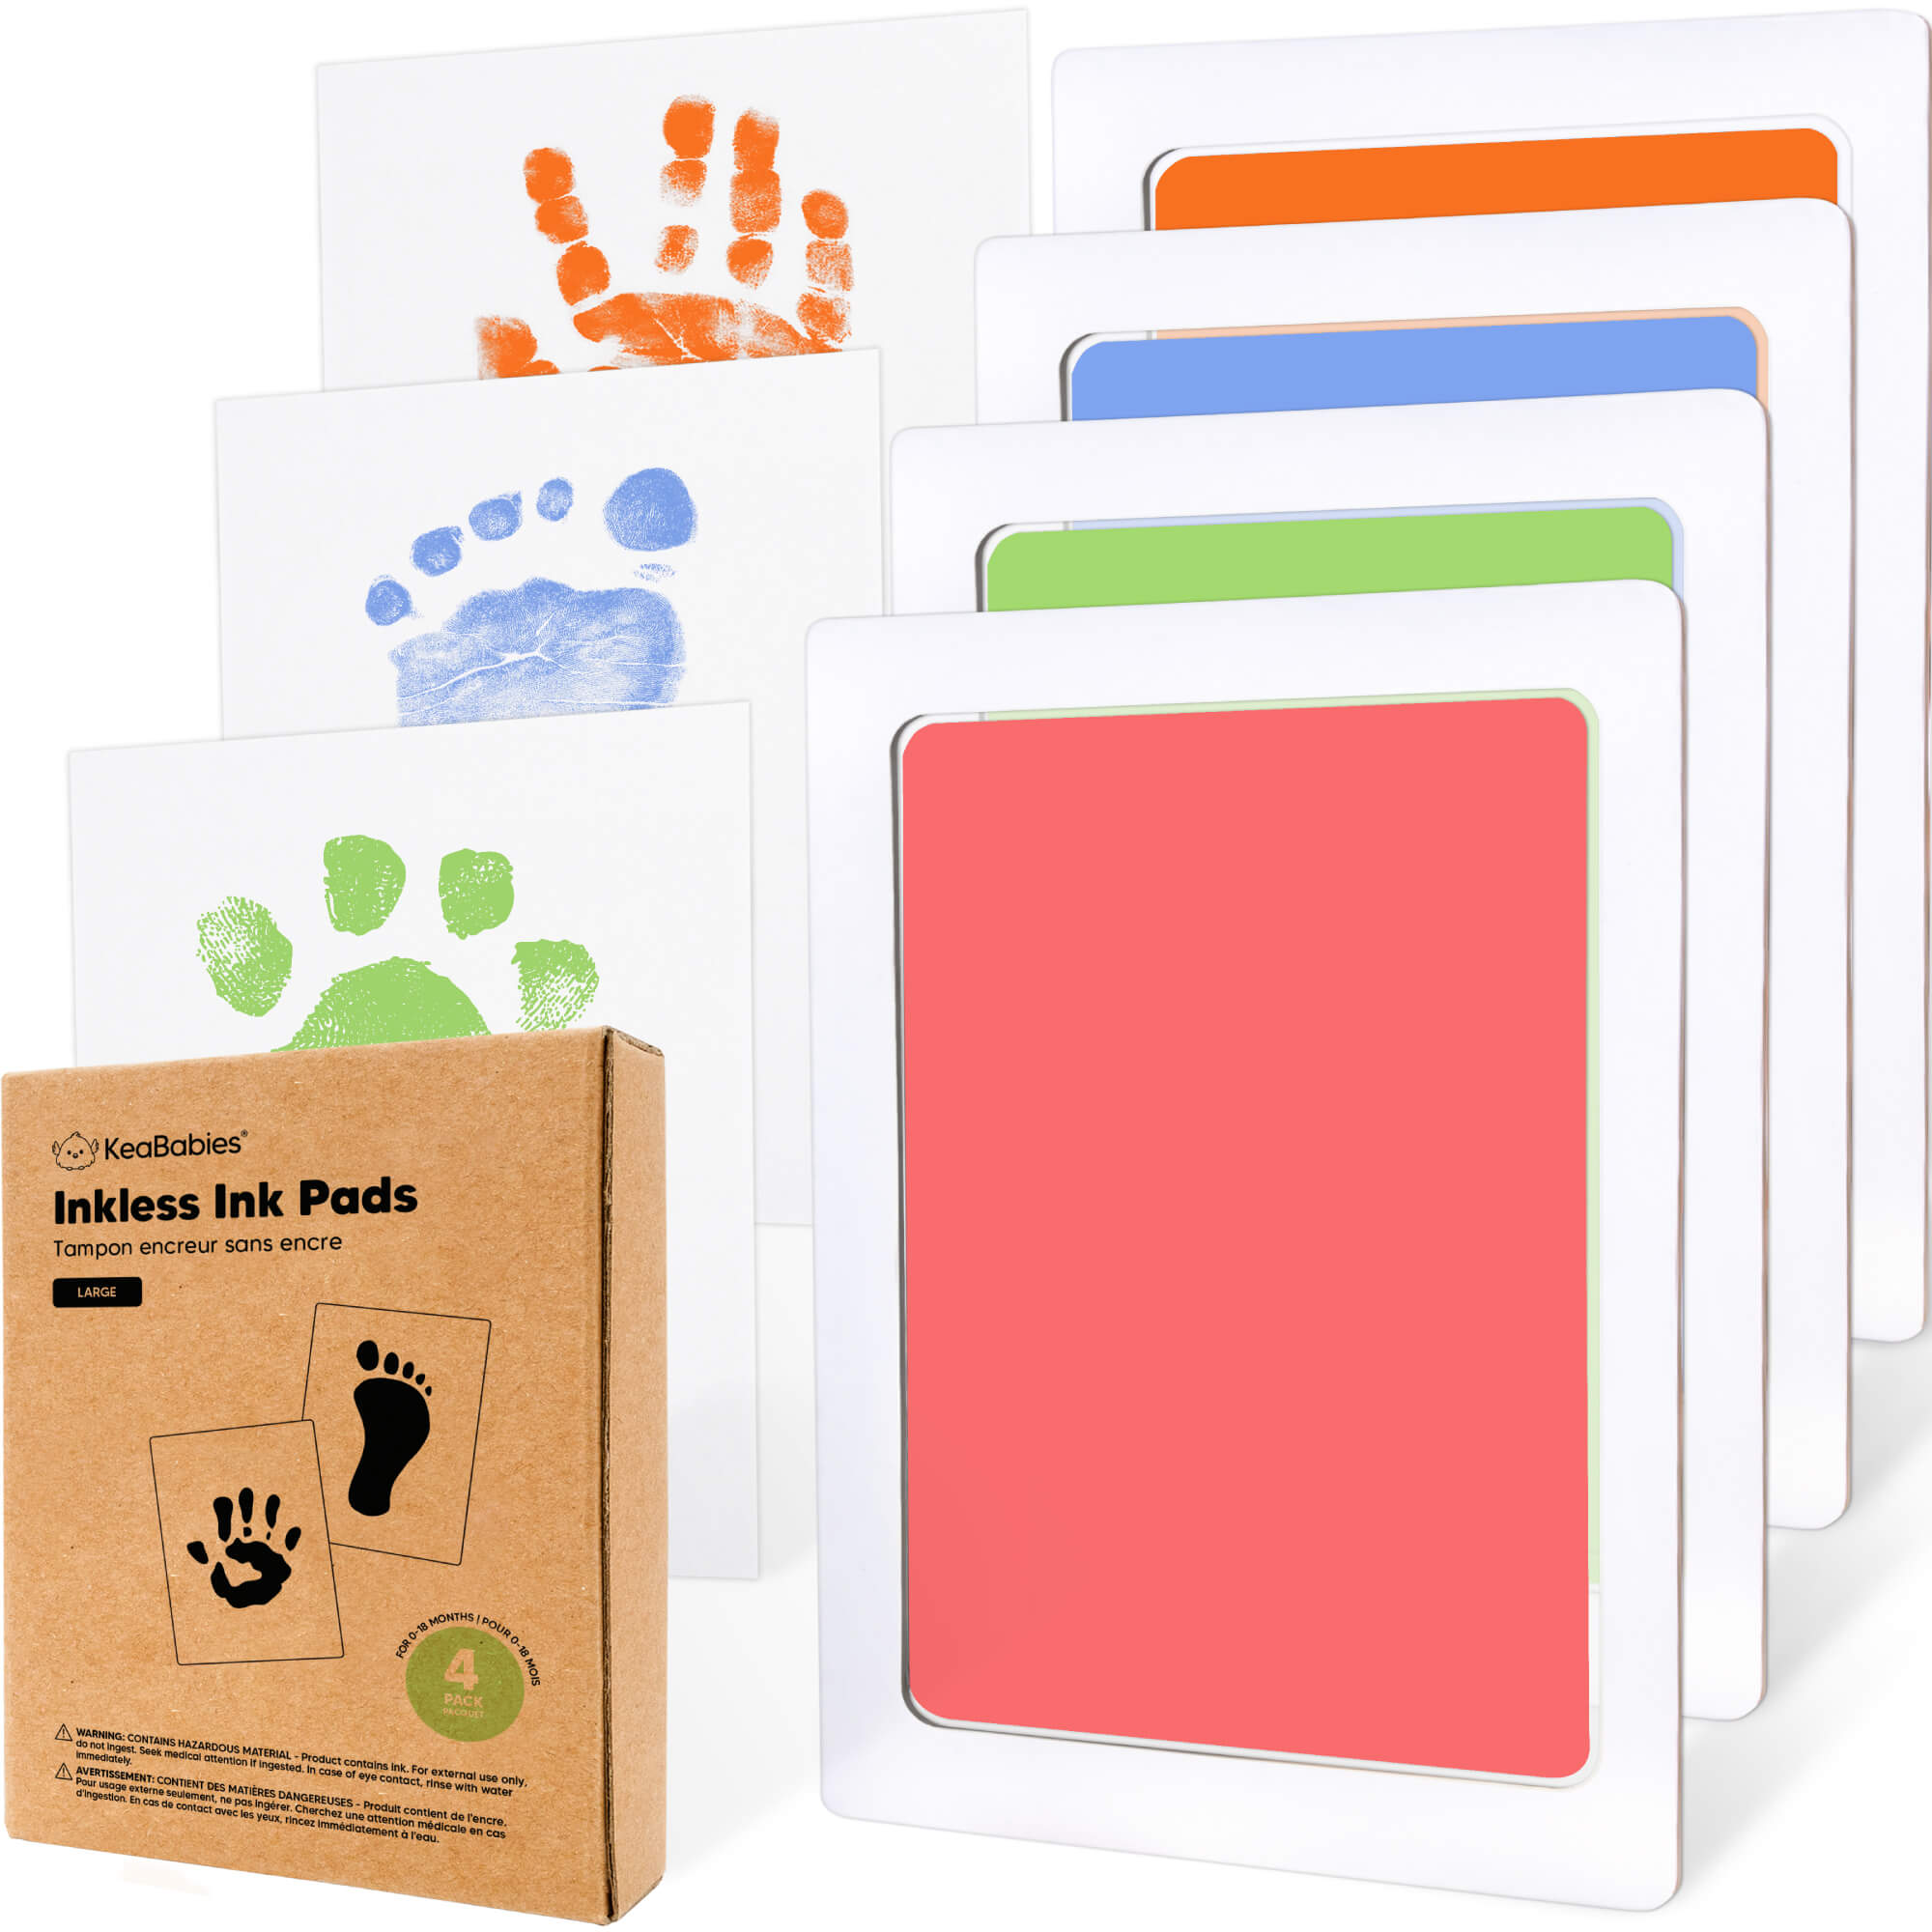 Baby Hand and Footprint Kit by Forever Fun Times, Get Hundreds of Detailed  Prints with One Baby Safe Ink Pad, Easy to Clean, and Works with Any Paper  or Card